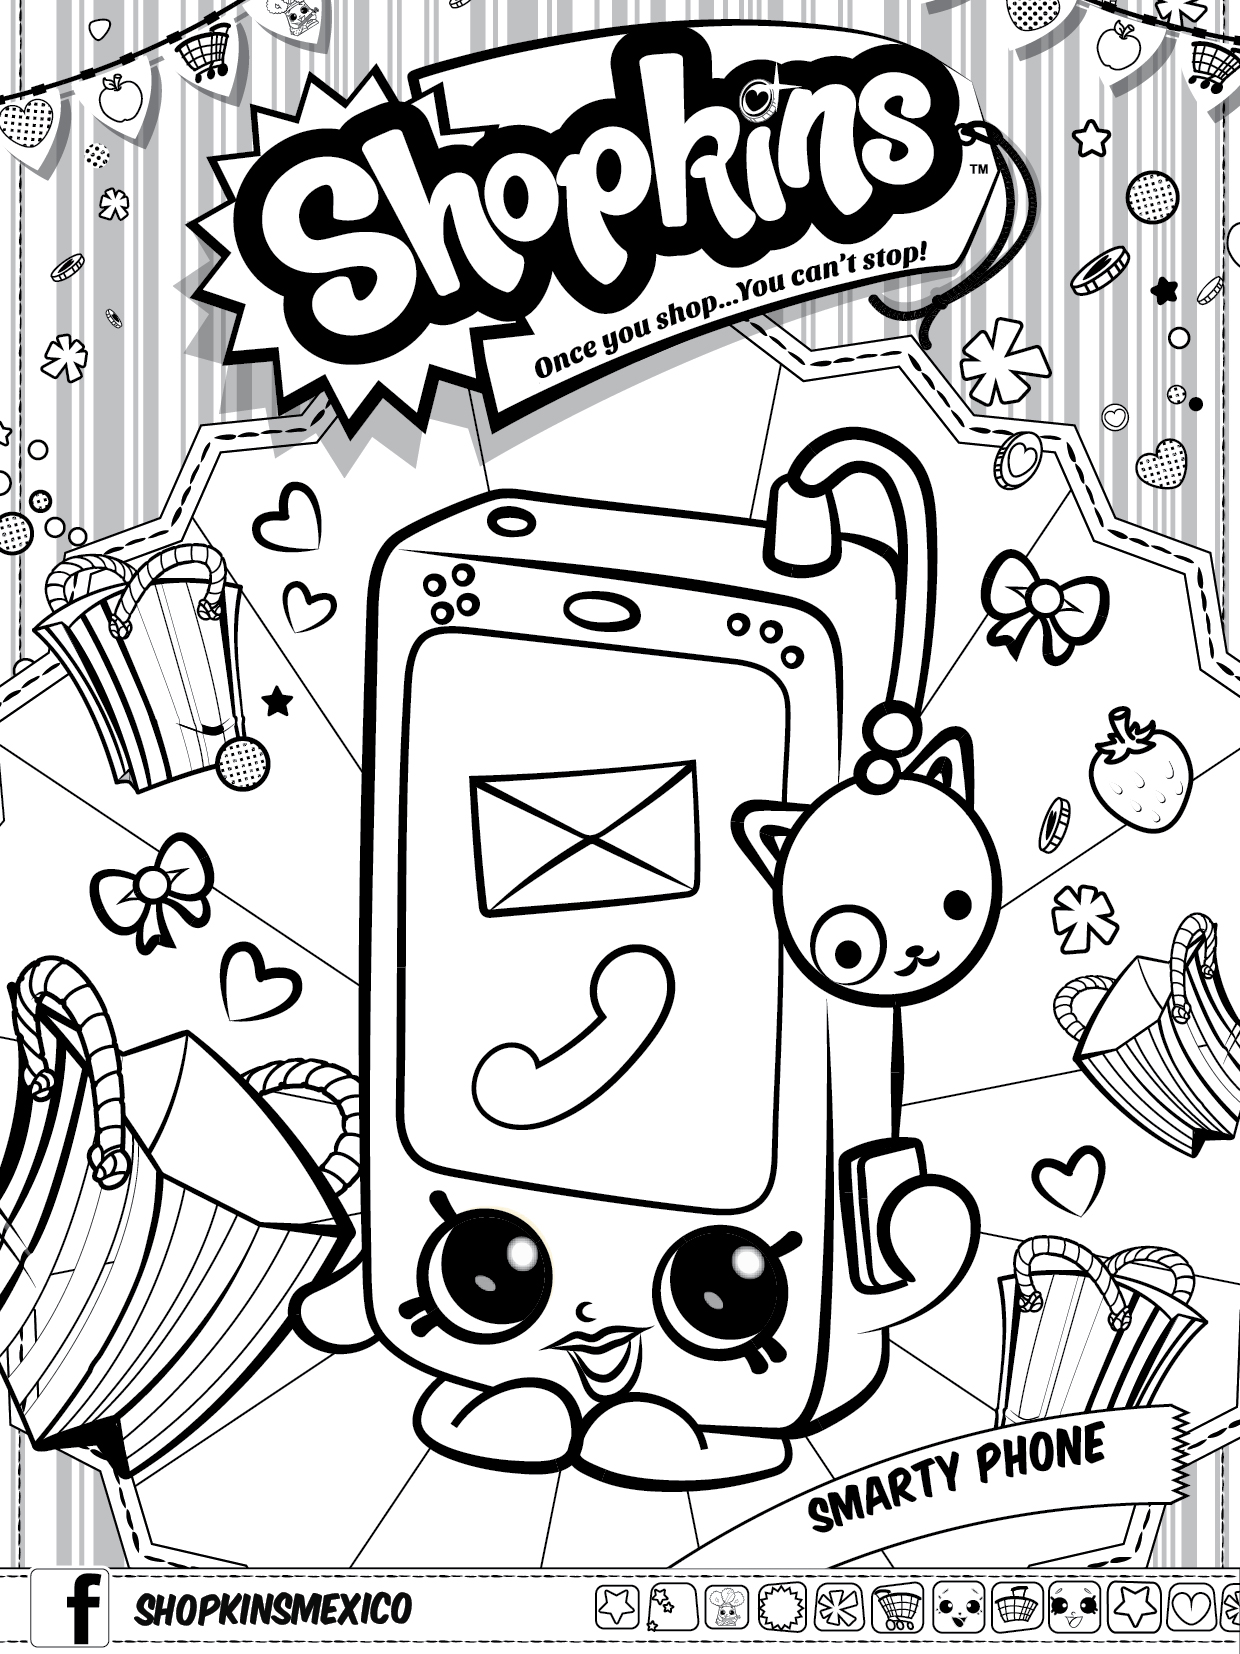 Shopkins Smarty Phone Coloring Page - Get Coloring Pages